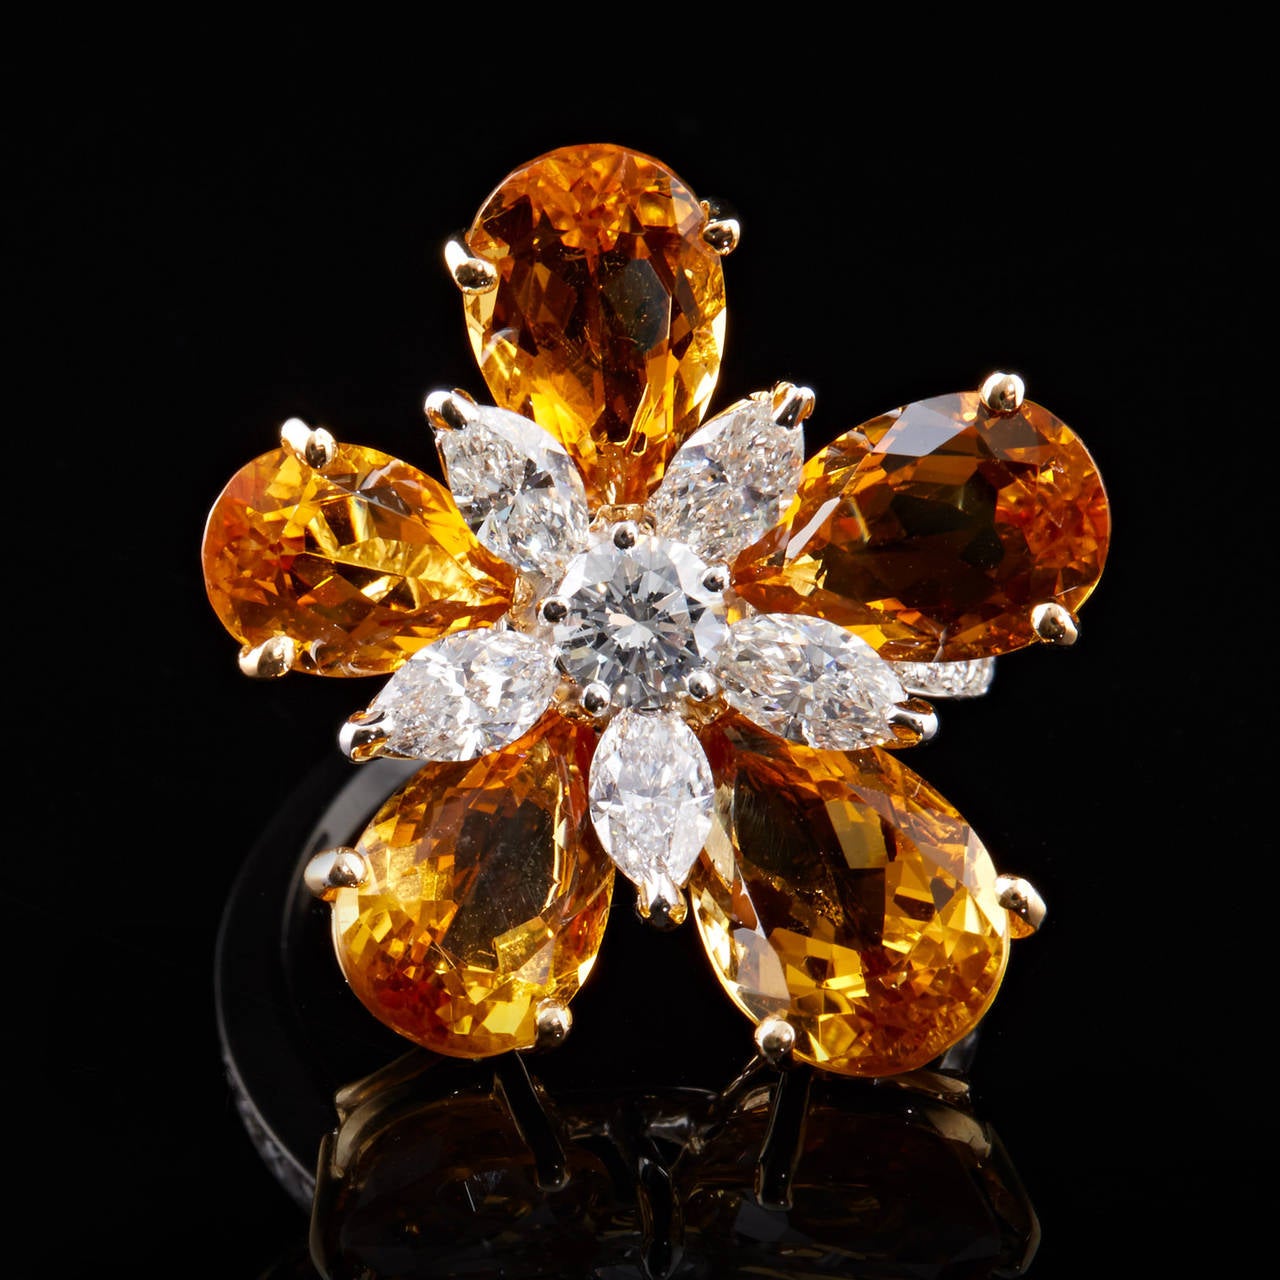 Luca Carati 18Kt white gold flower design ring featuring 5 pear shape citrine flower petals set in yellow gold. The center of the flower is a round brilliant diamond surrounded by 5 marquise cut diamonds set in white gold. The 1.71 carat total